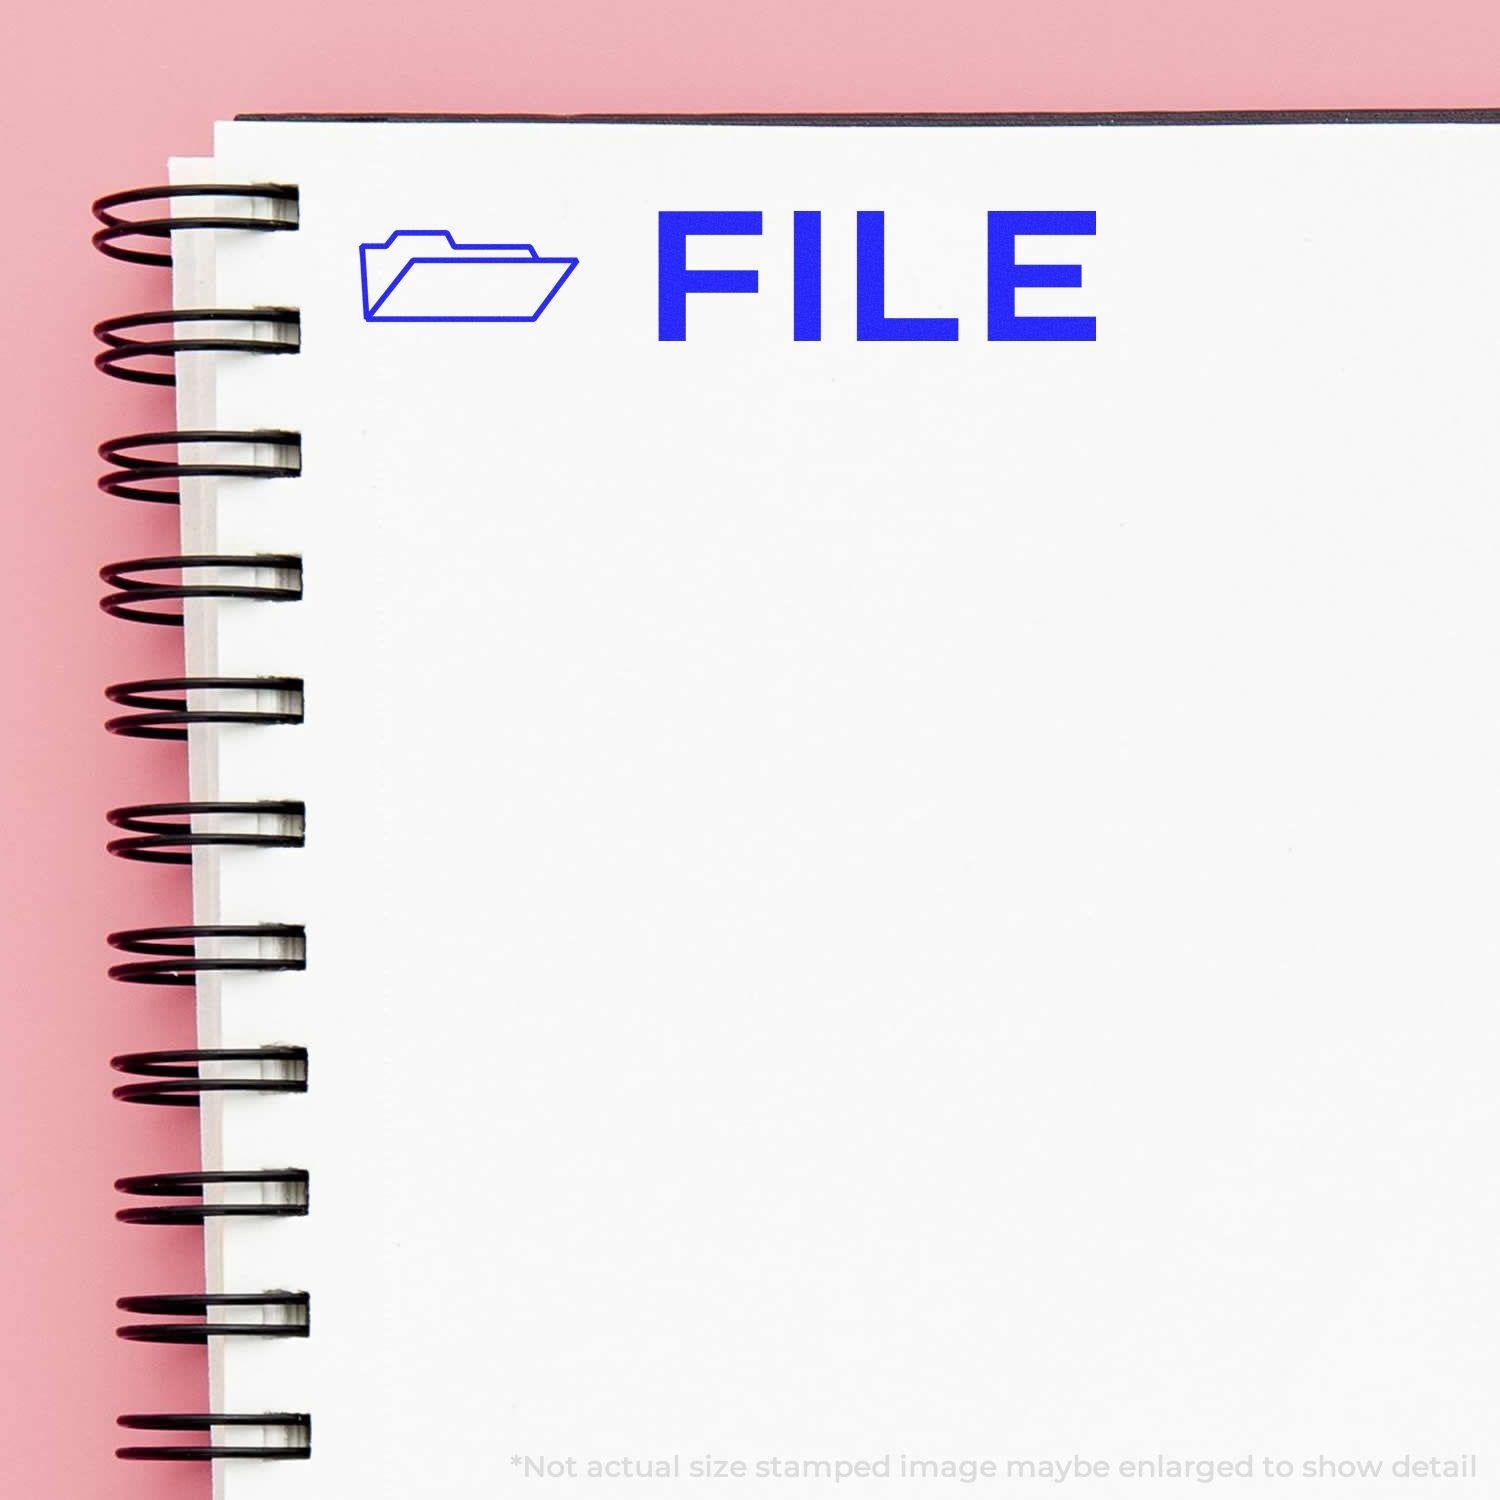 A self-inking stamp with a stamped image showing how the text "FILE" in a bold font and a small icon of a file folder on the left is displayed after stamping.